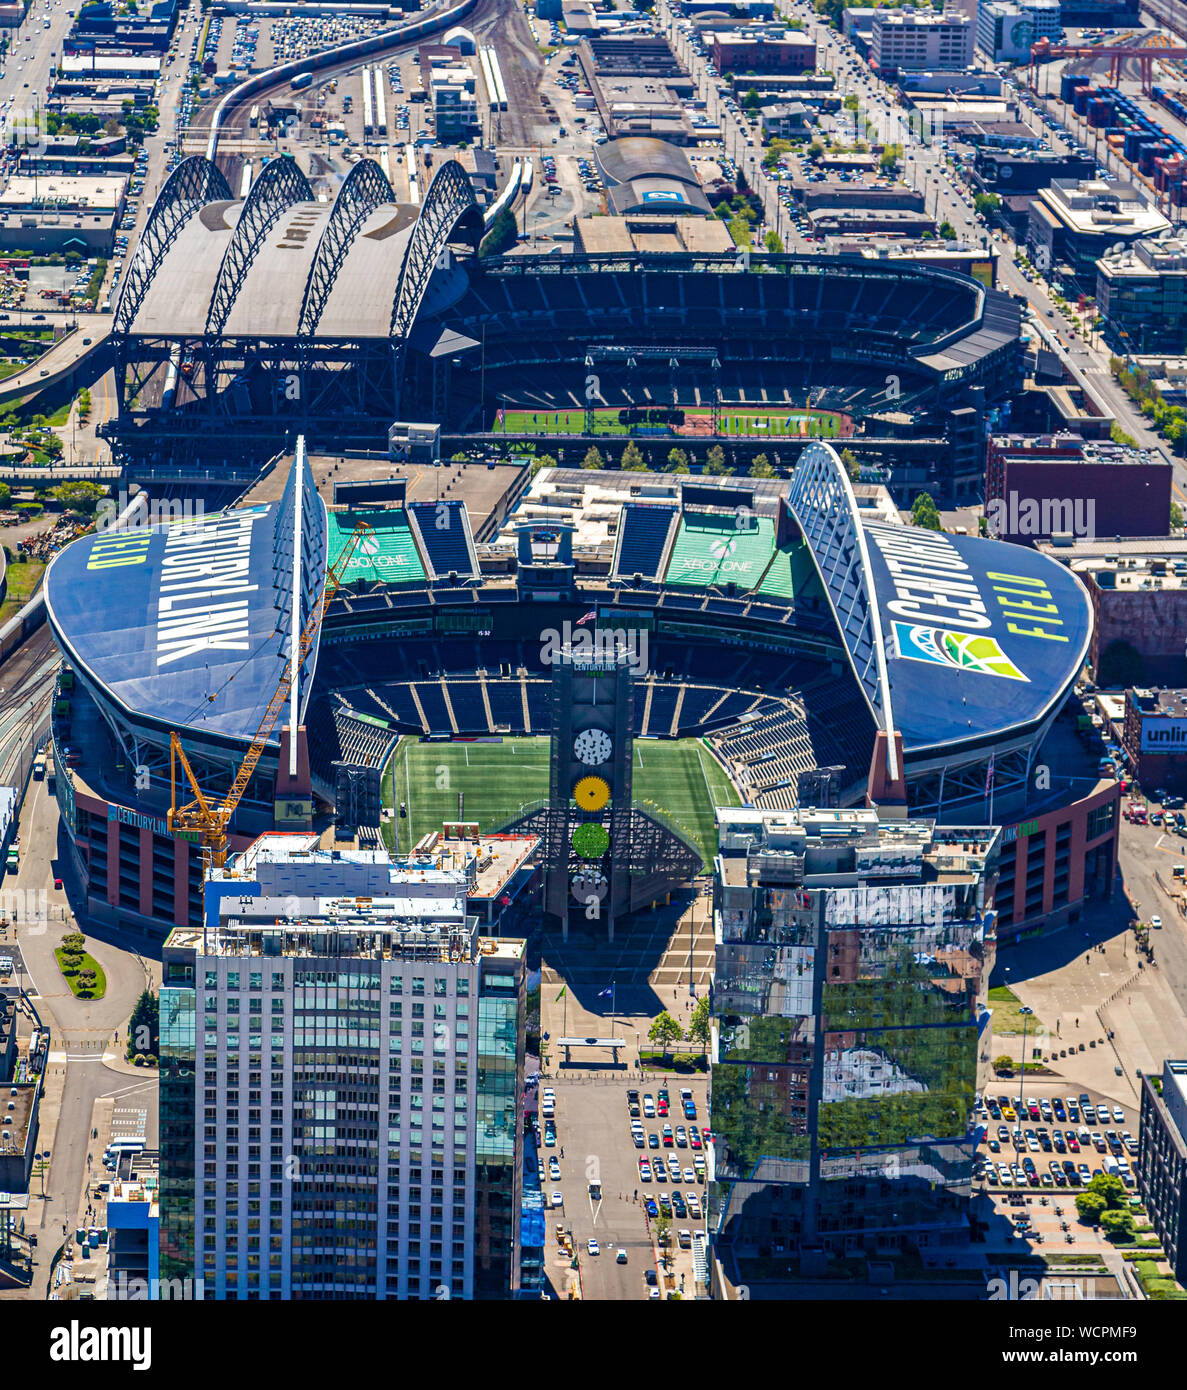 View of CenturyLink field with the roof open in Seattle, Washington from above Stock Photo